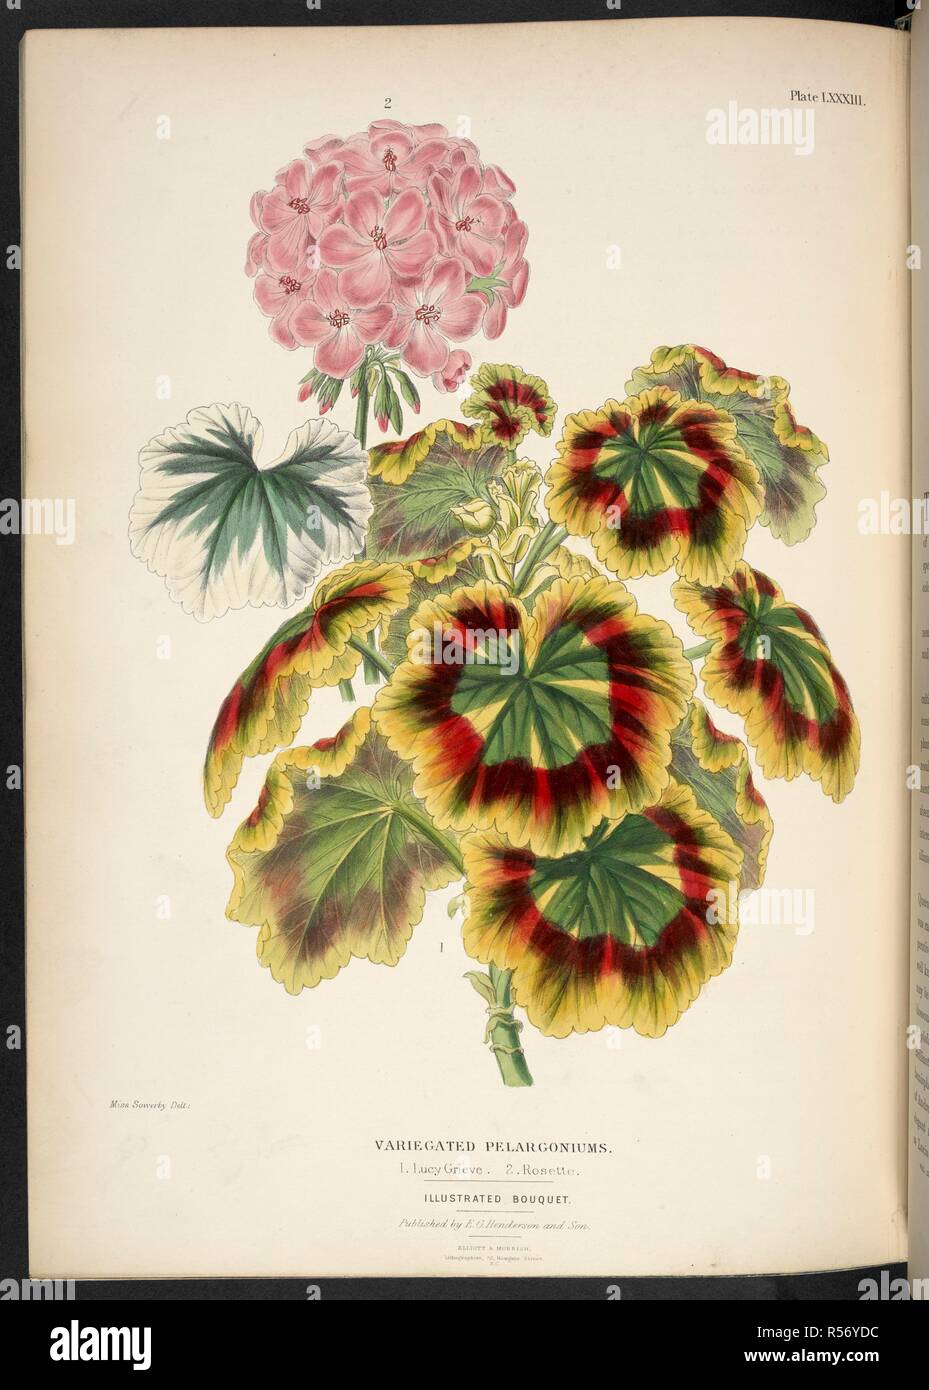 New variegated Pelagoniums. Variegated pelargoniums. 1. Lucy Grieve; 2. Rosette. The Illustrated Bouquet, consisting of figures, with descriptions of new flowers. London, 1857-64. Source: 1823.c.13 plate 83. Author: Henderson, Edward George. Sowerby, Miss. Stock Photo